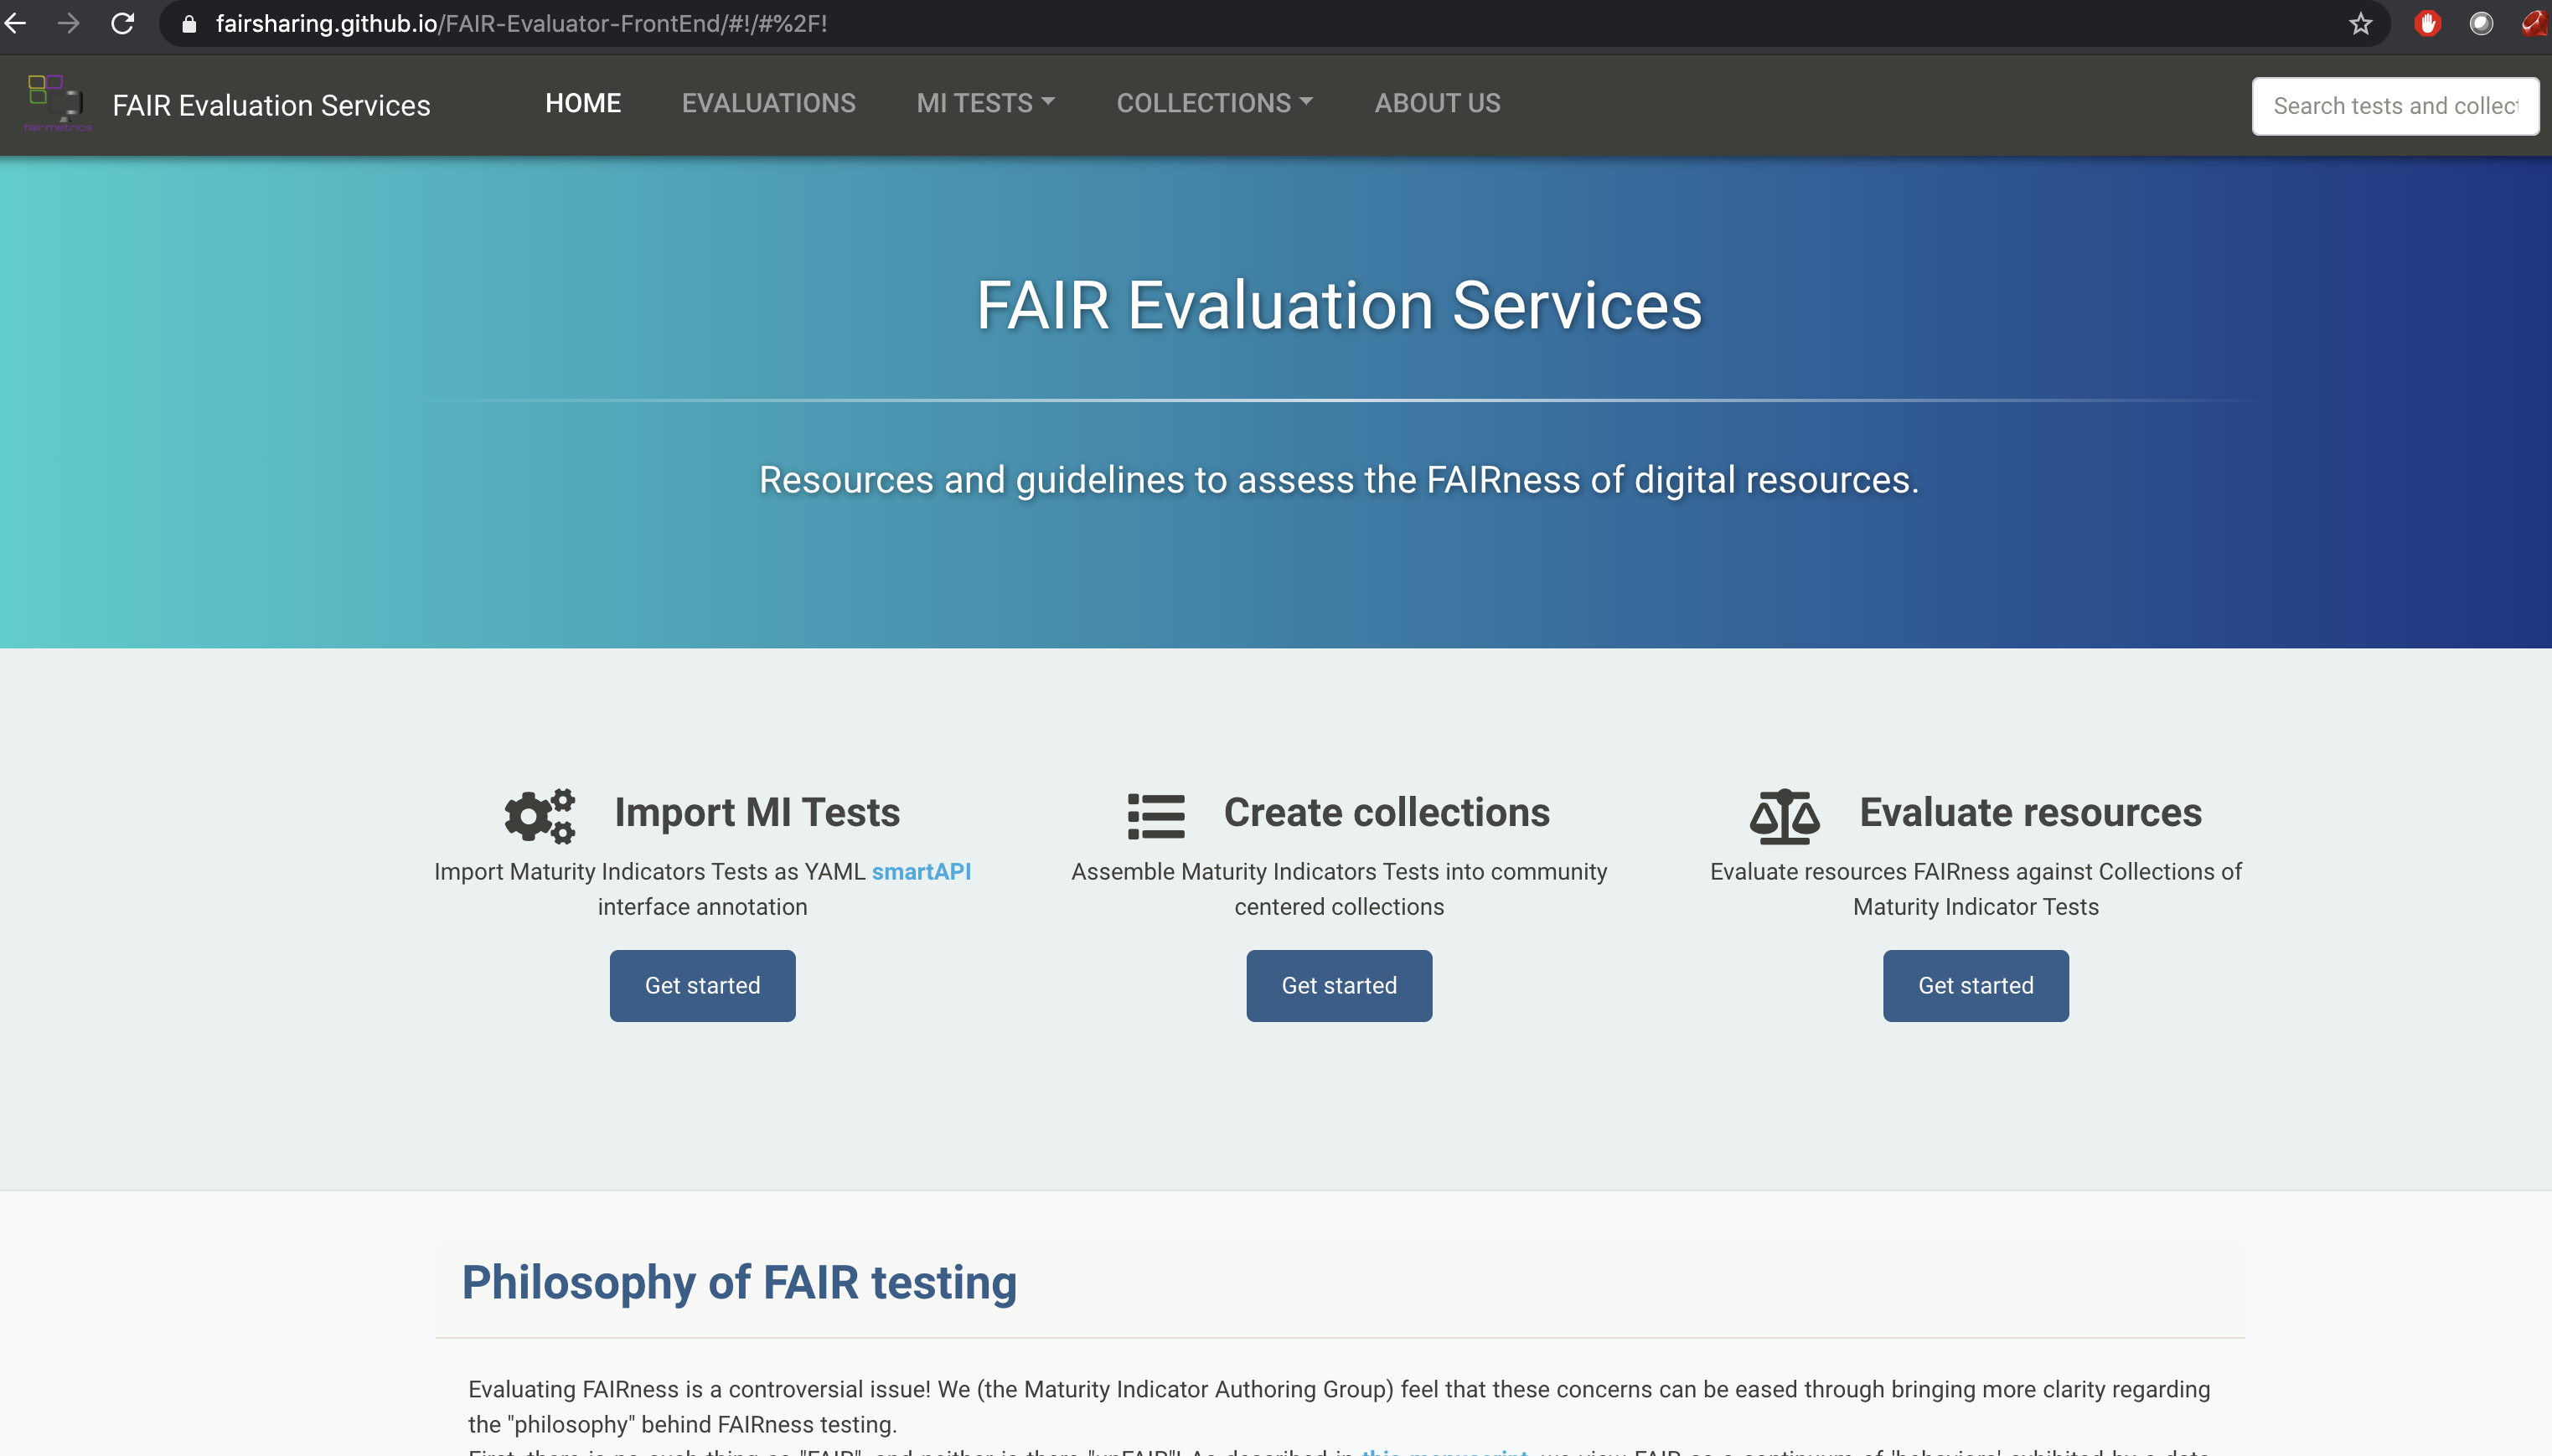 the FAIREvaluator Home page